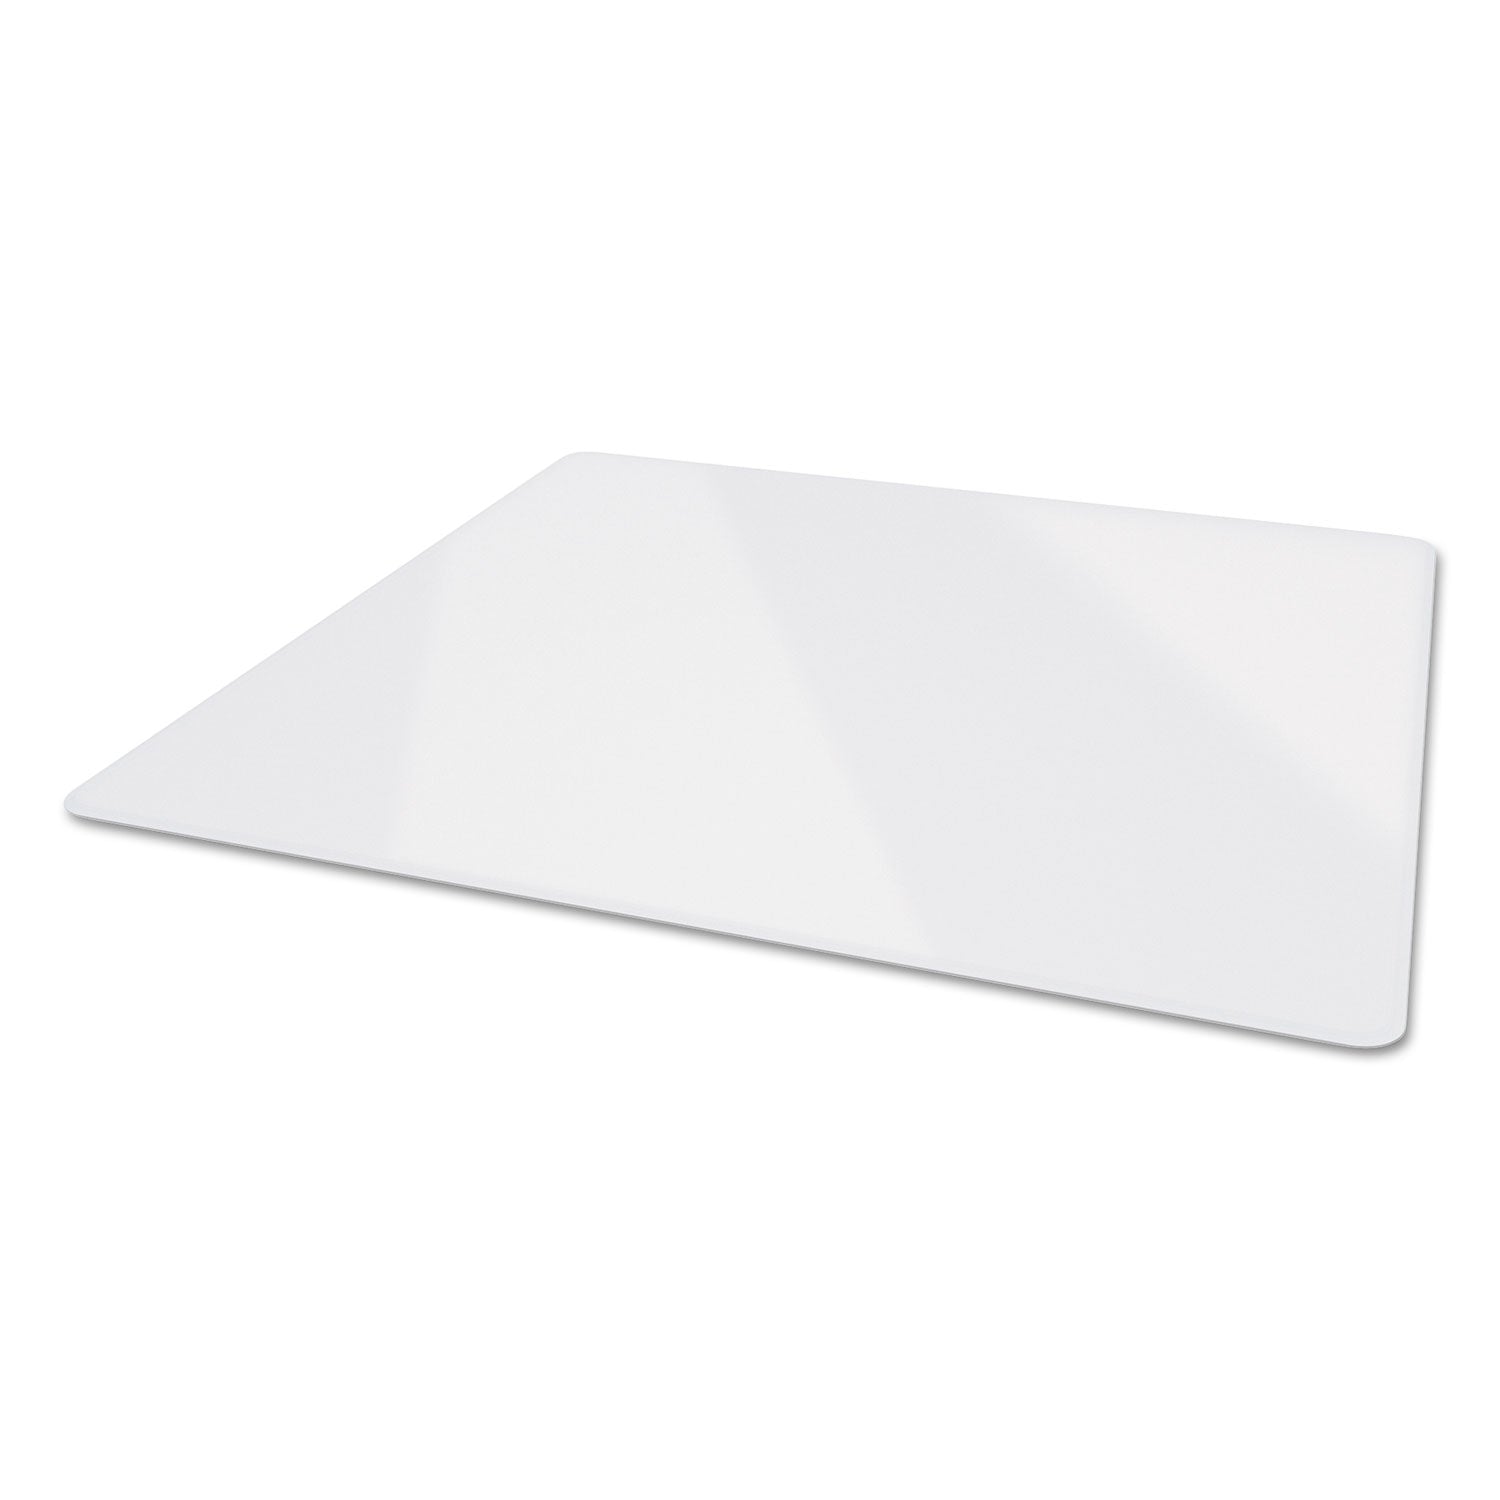 premium-glass-all-day-use-chair-mat--all-floor-types-48-x-60-rectangular-clear_defcmg70434860 - 3